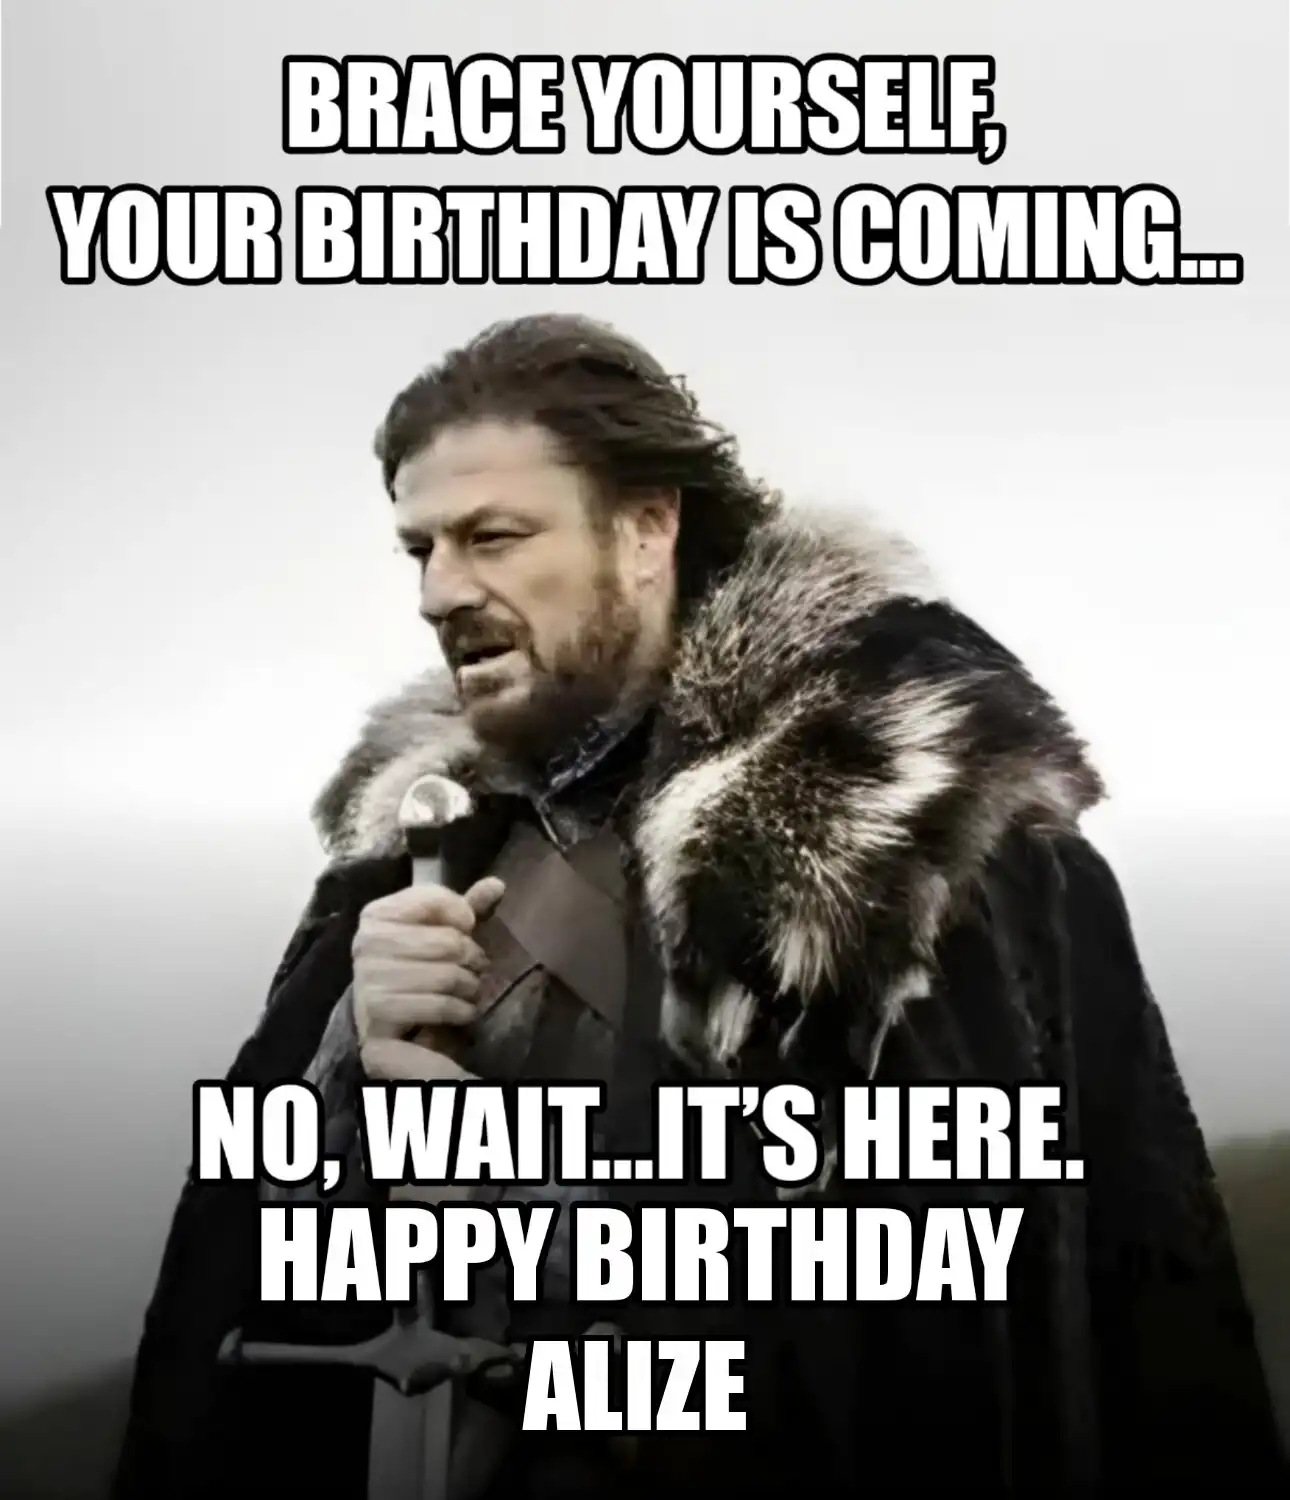 Happy Birthday Alize Brace Yourself Your Birthday Is Coming Meme